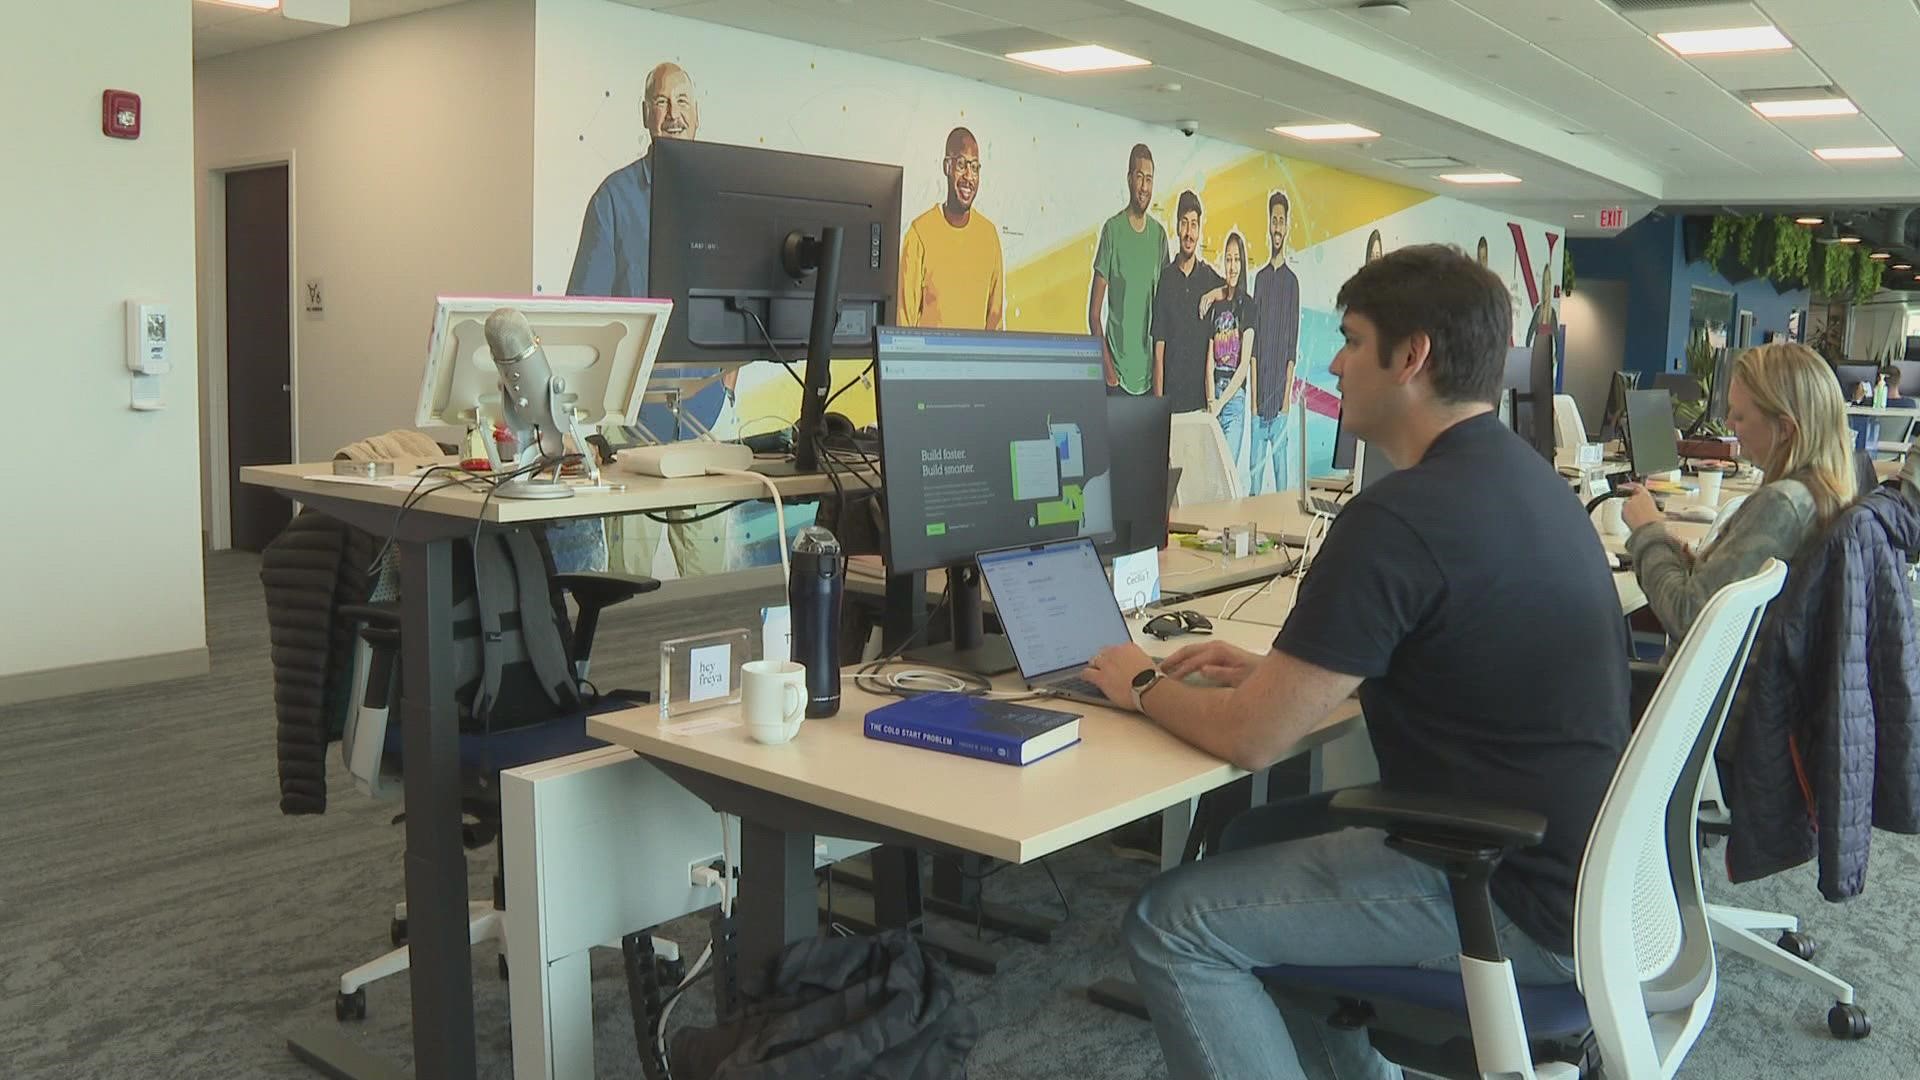 A Maine business owner was recently backed by Google for his company, eskuad.